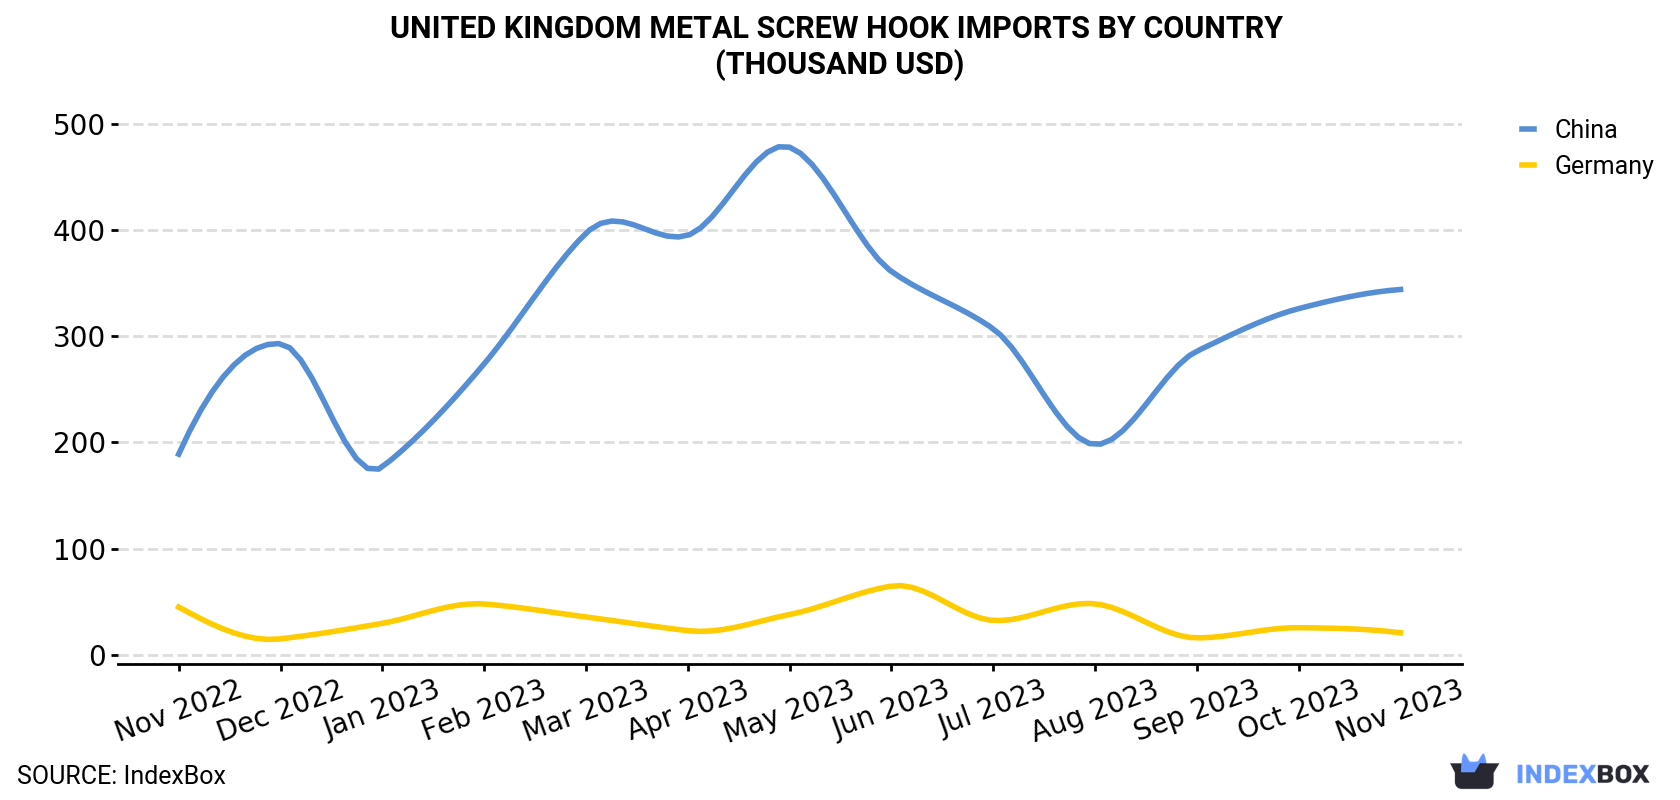 United Kingdom Metal Screw Hook Imports By Country (Thousand USD)